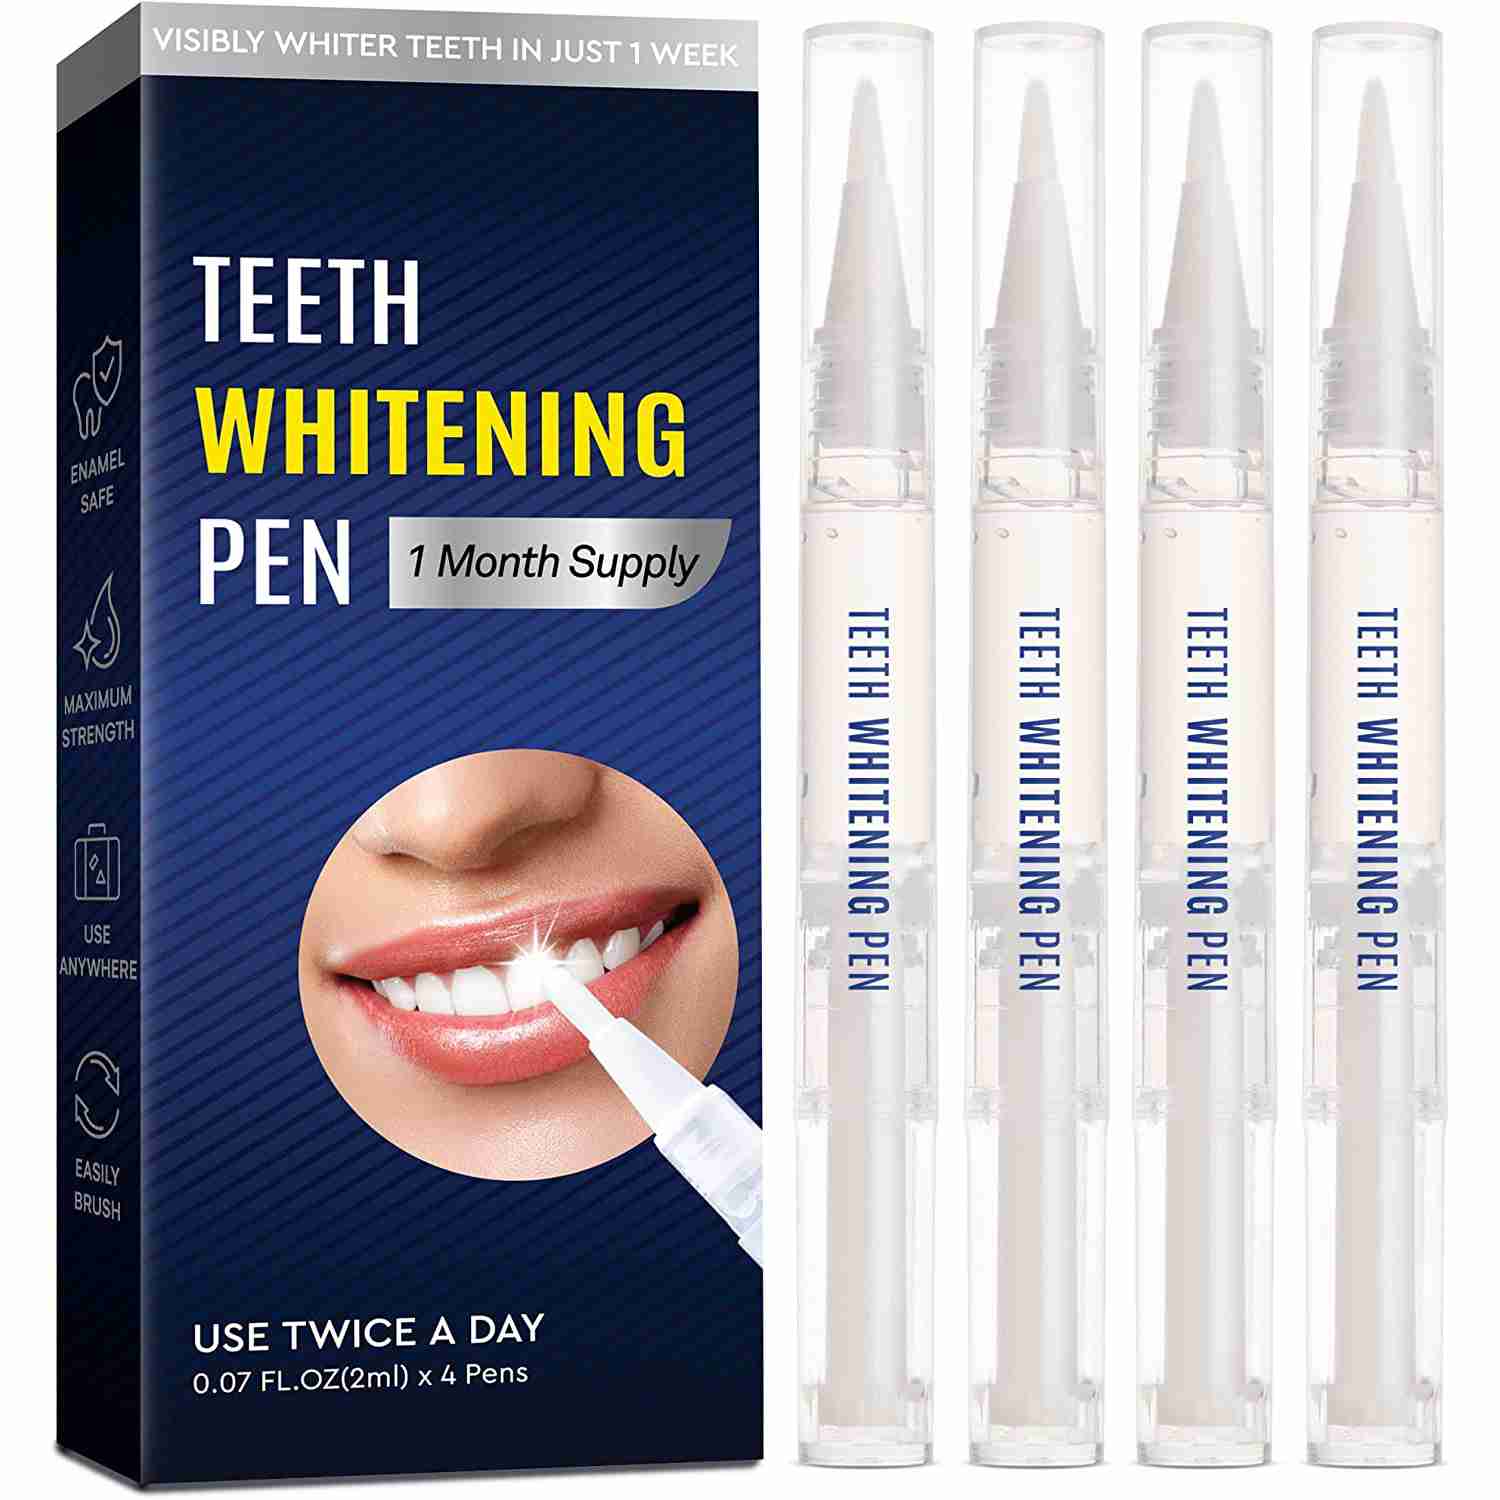 35-carbamide-peroxide-whitening-gel-for-white-teeth with cash back rebate